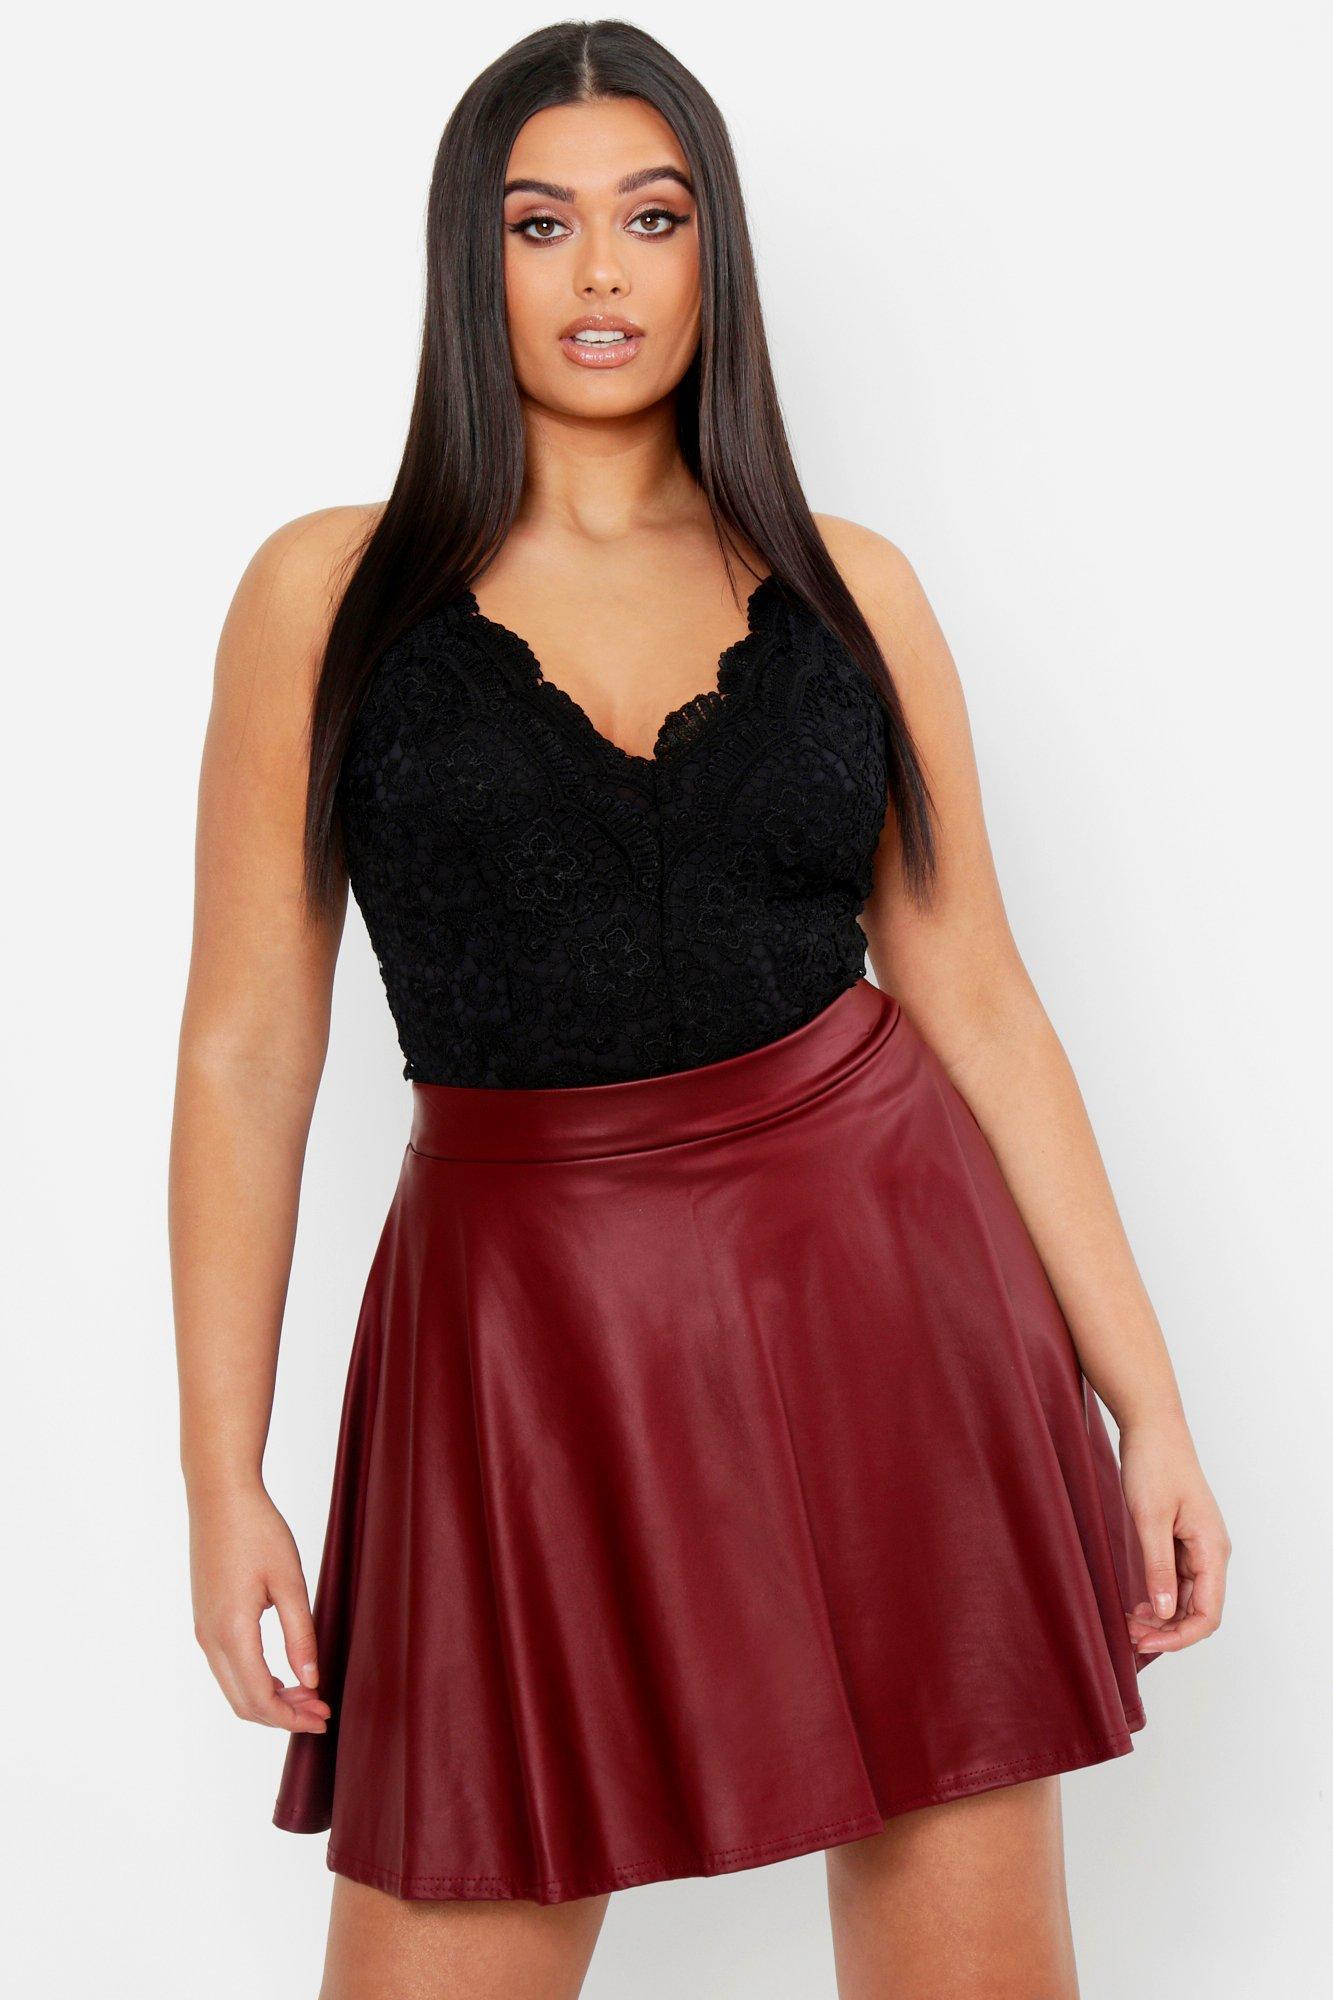  Boohoo  Plus Pu Skater Skirt  in Red  Lyst